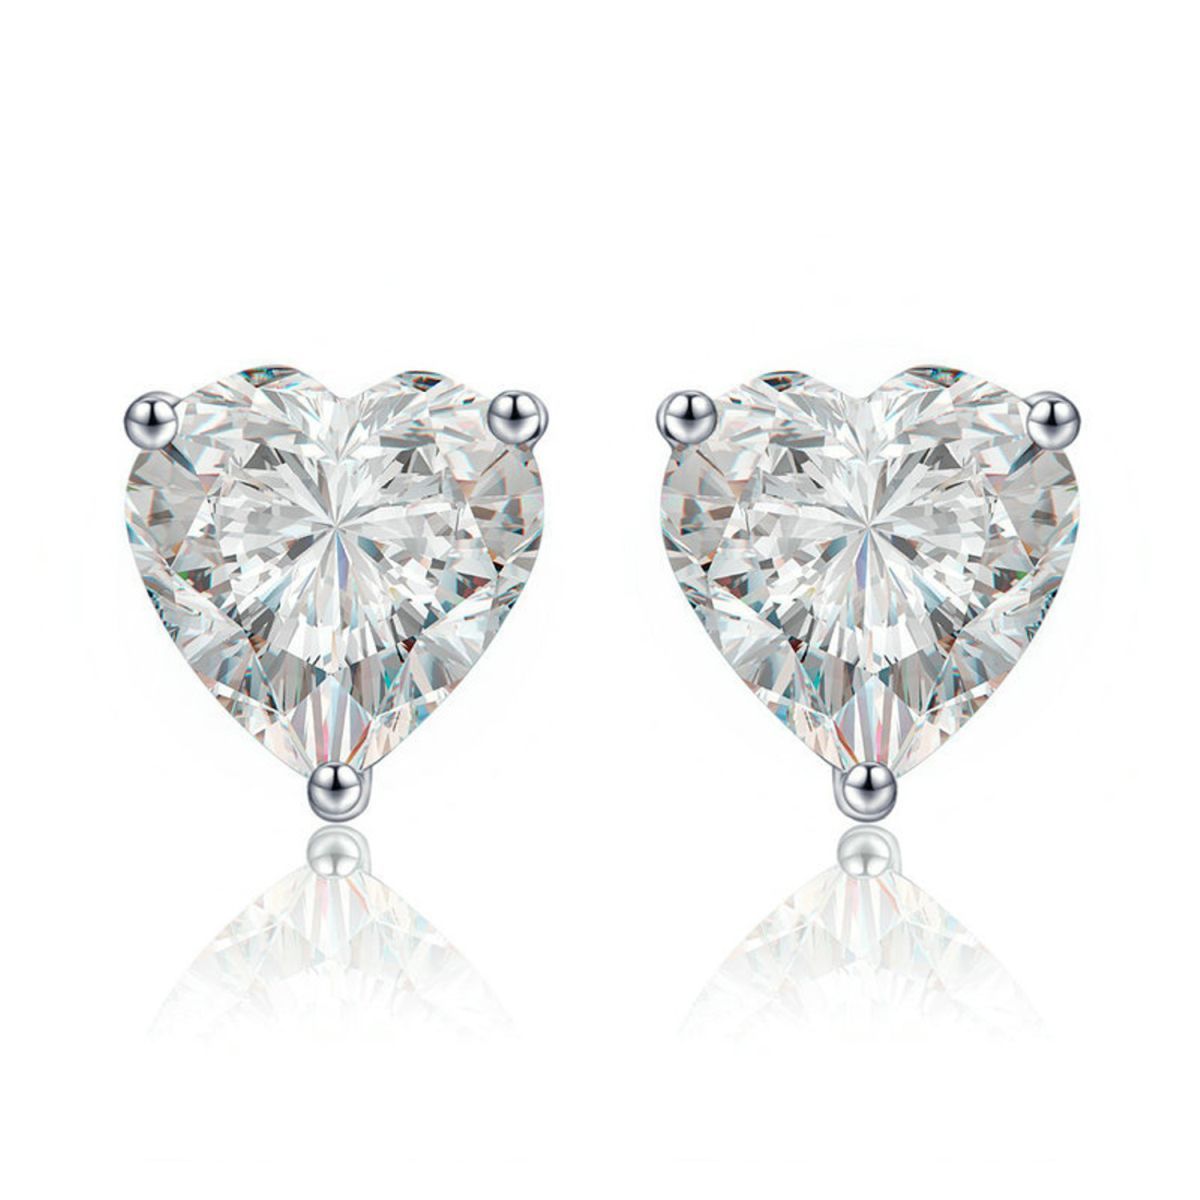 Solitaire Heart Cut Cz Stainless Steel Ear Stud Pair Earring